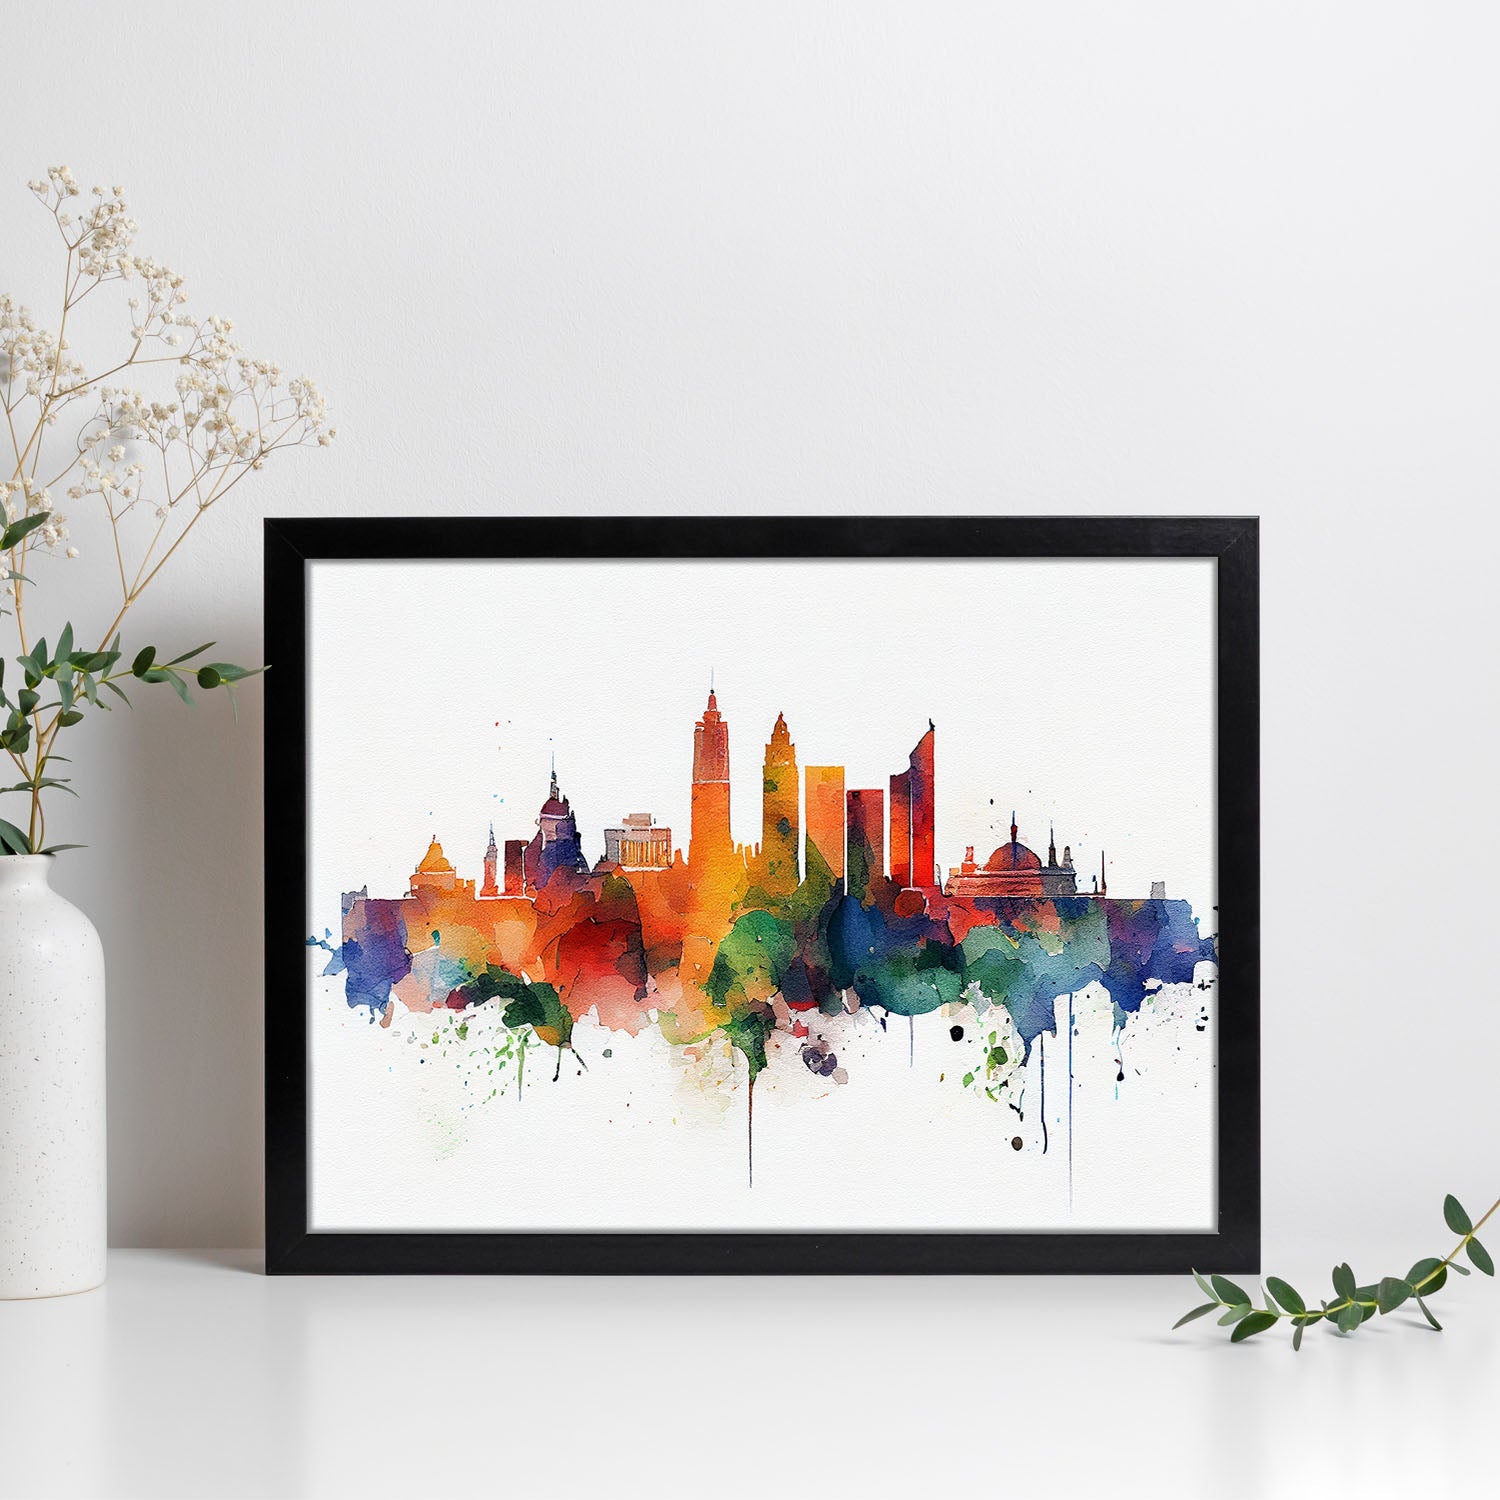 Nacnic watercolor of a skyline of the city of Madrid_3. Aesthetic Wall Art Prints for Bedroom or Living Room Design.-Artwork-Nacnic-A4-Sin Marco-Nacnic Estudio SL